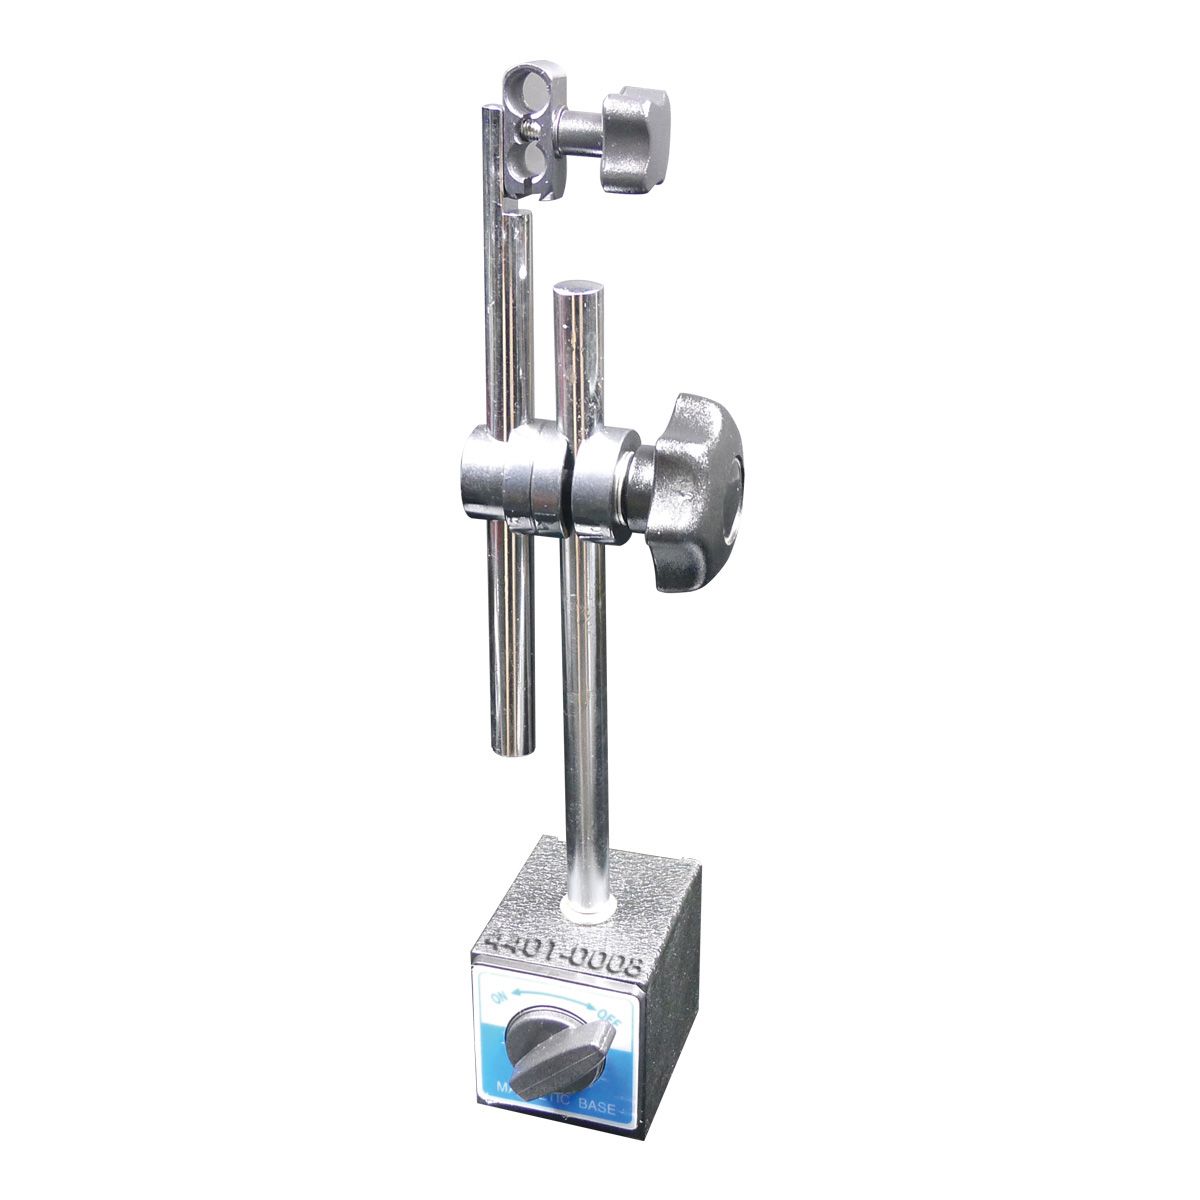 DUAL CLAMPING HOLE MAGNETIC BASE WITH ONE KNOB LOCK (4401-0008)